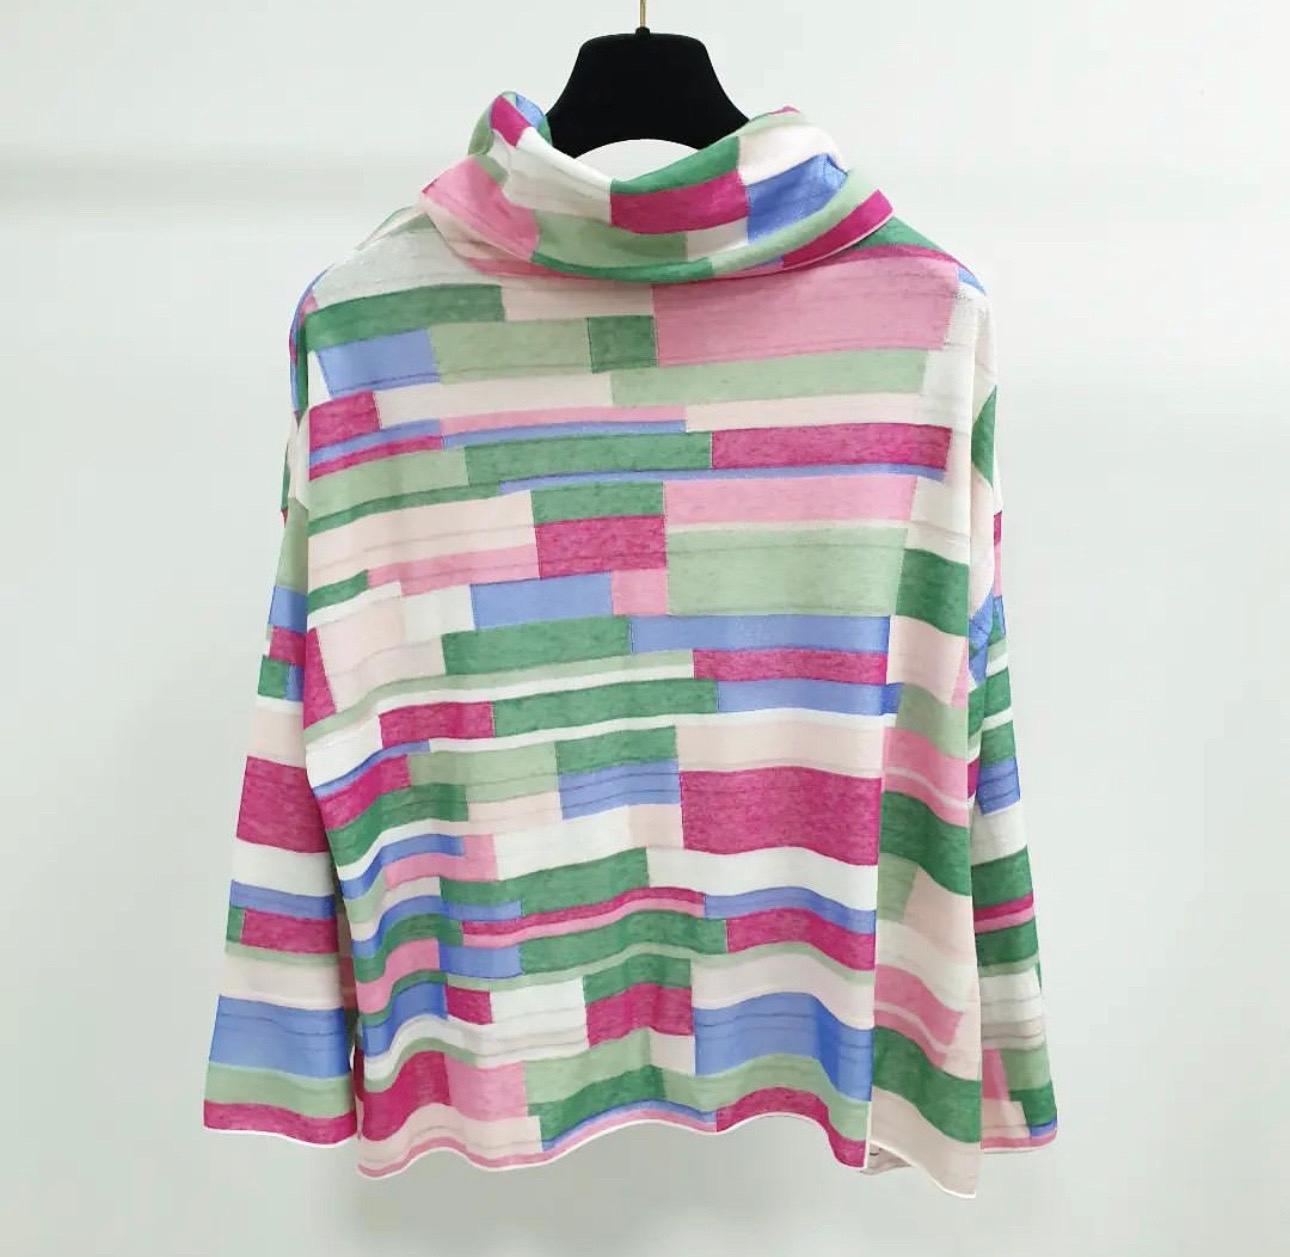 Chanel Multicolor Abstract Printed Knit Turtleneck Top In Excellent Condition For Sale In Krakow, PL